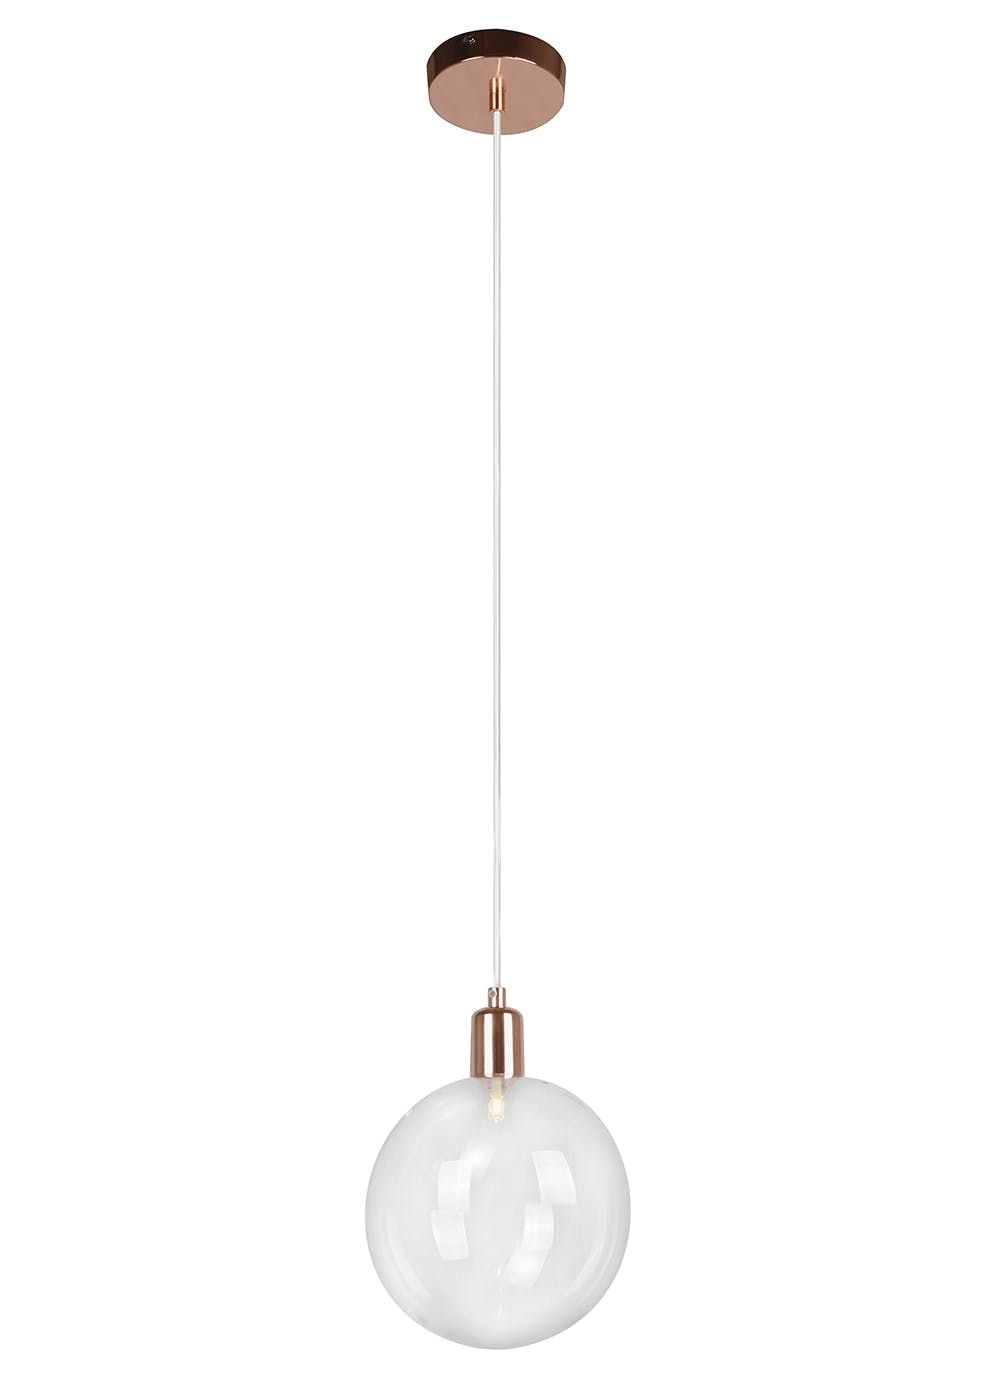 a single large round glass bulb with copper finishing suspended from a copper ceiling fixture